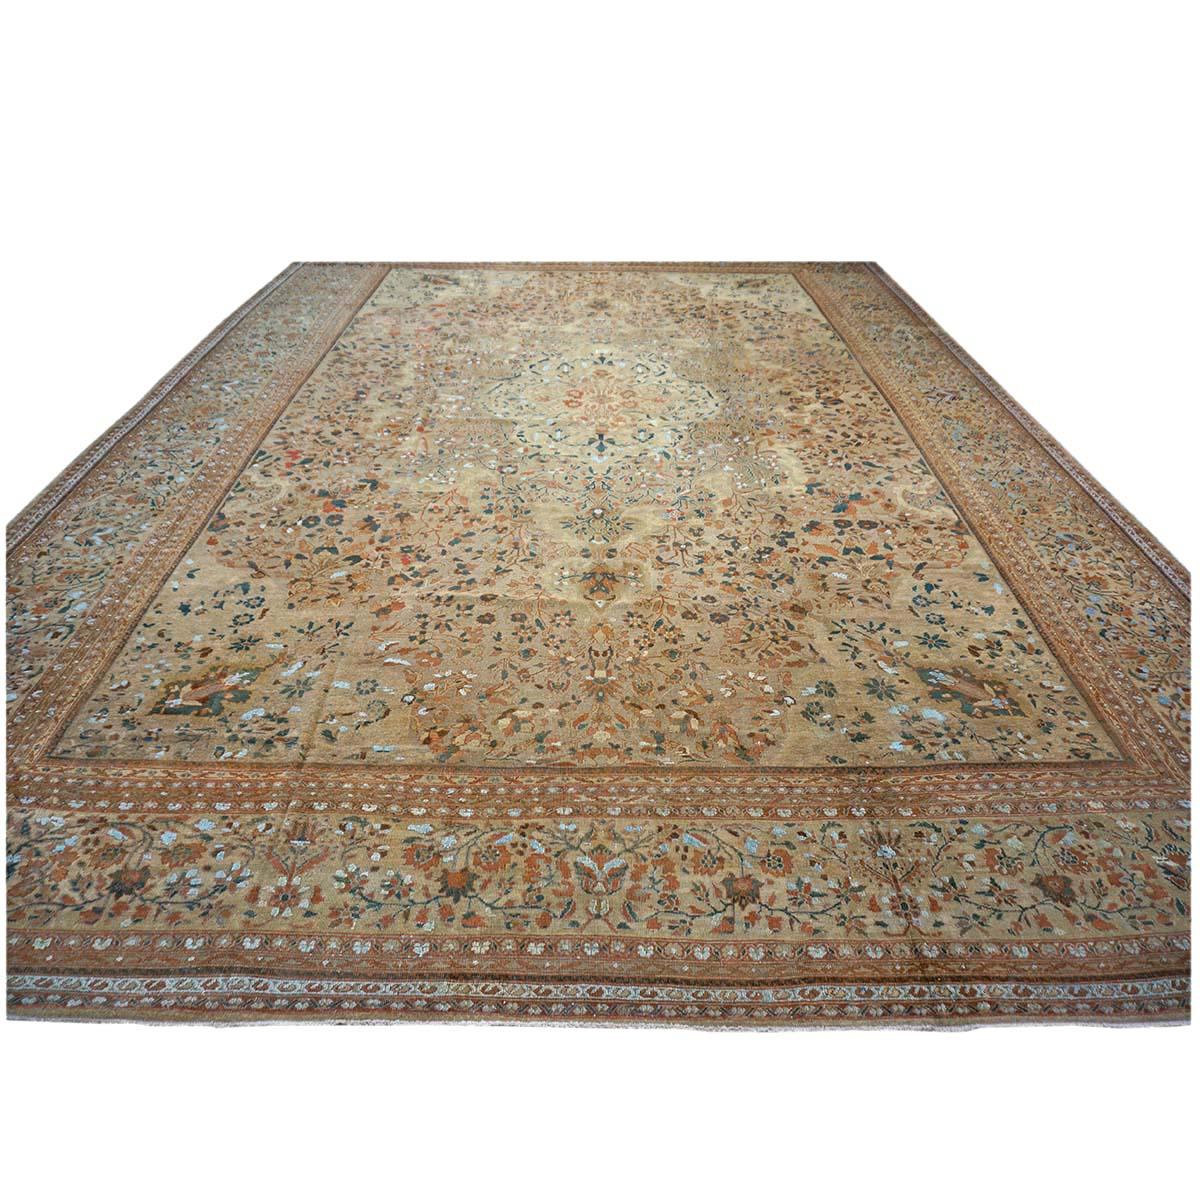 Hand-Woven 1870s Antique Persian Ziegler Sultanabad 15x21 Tan, Rust, & Light Blue Area Rug For Sale